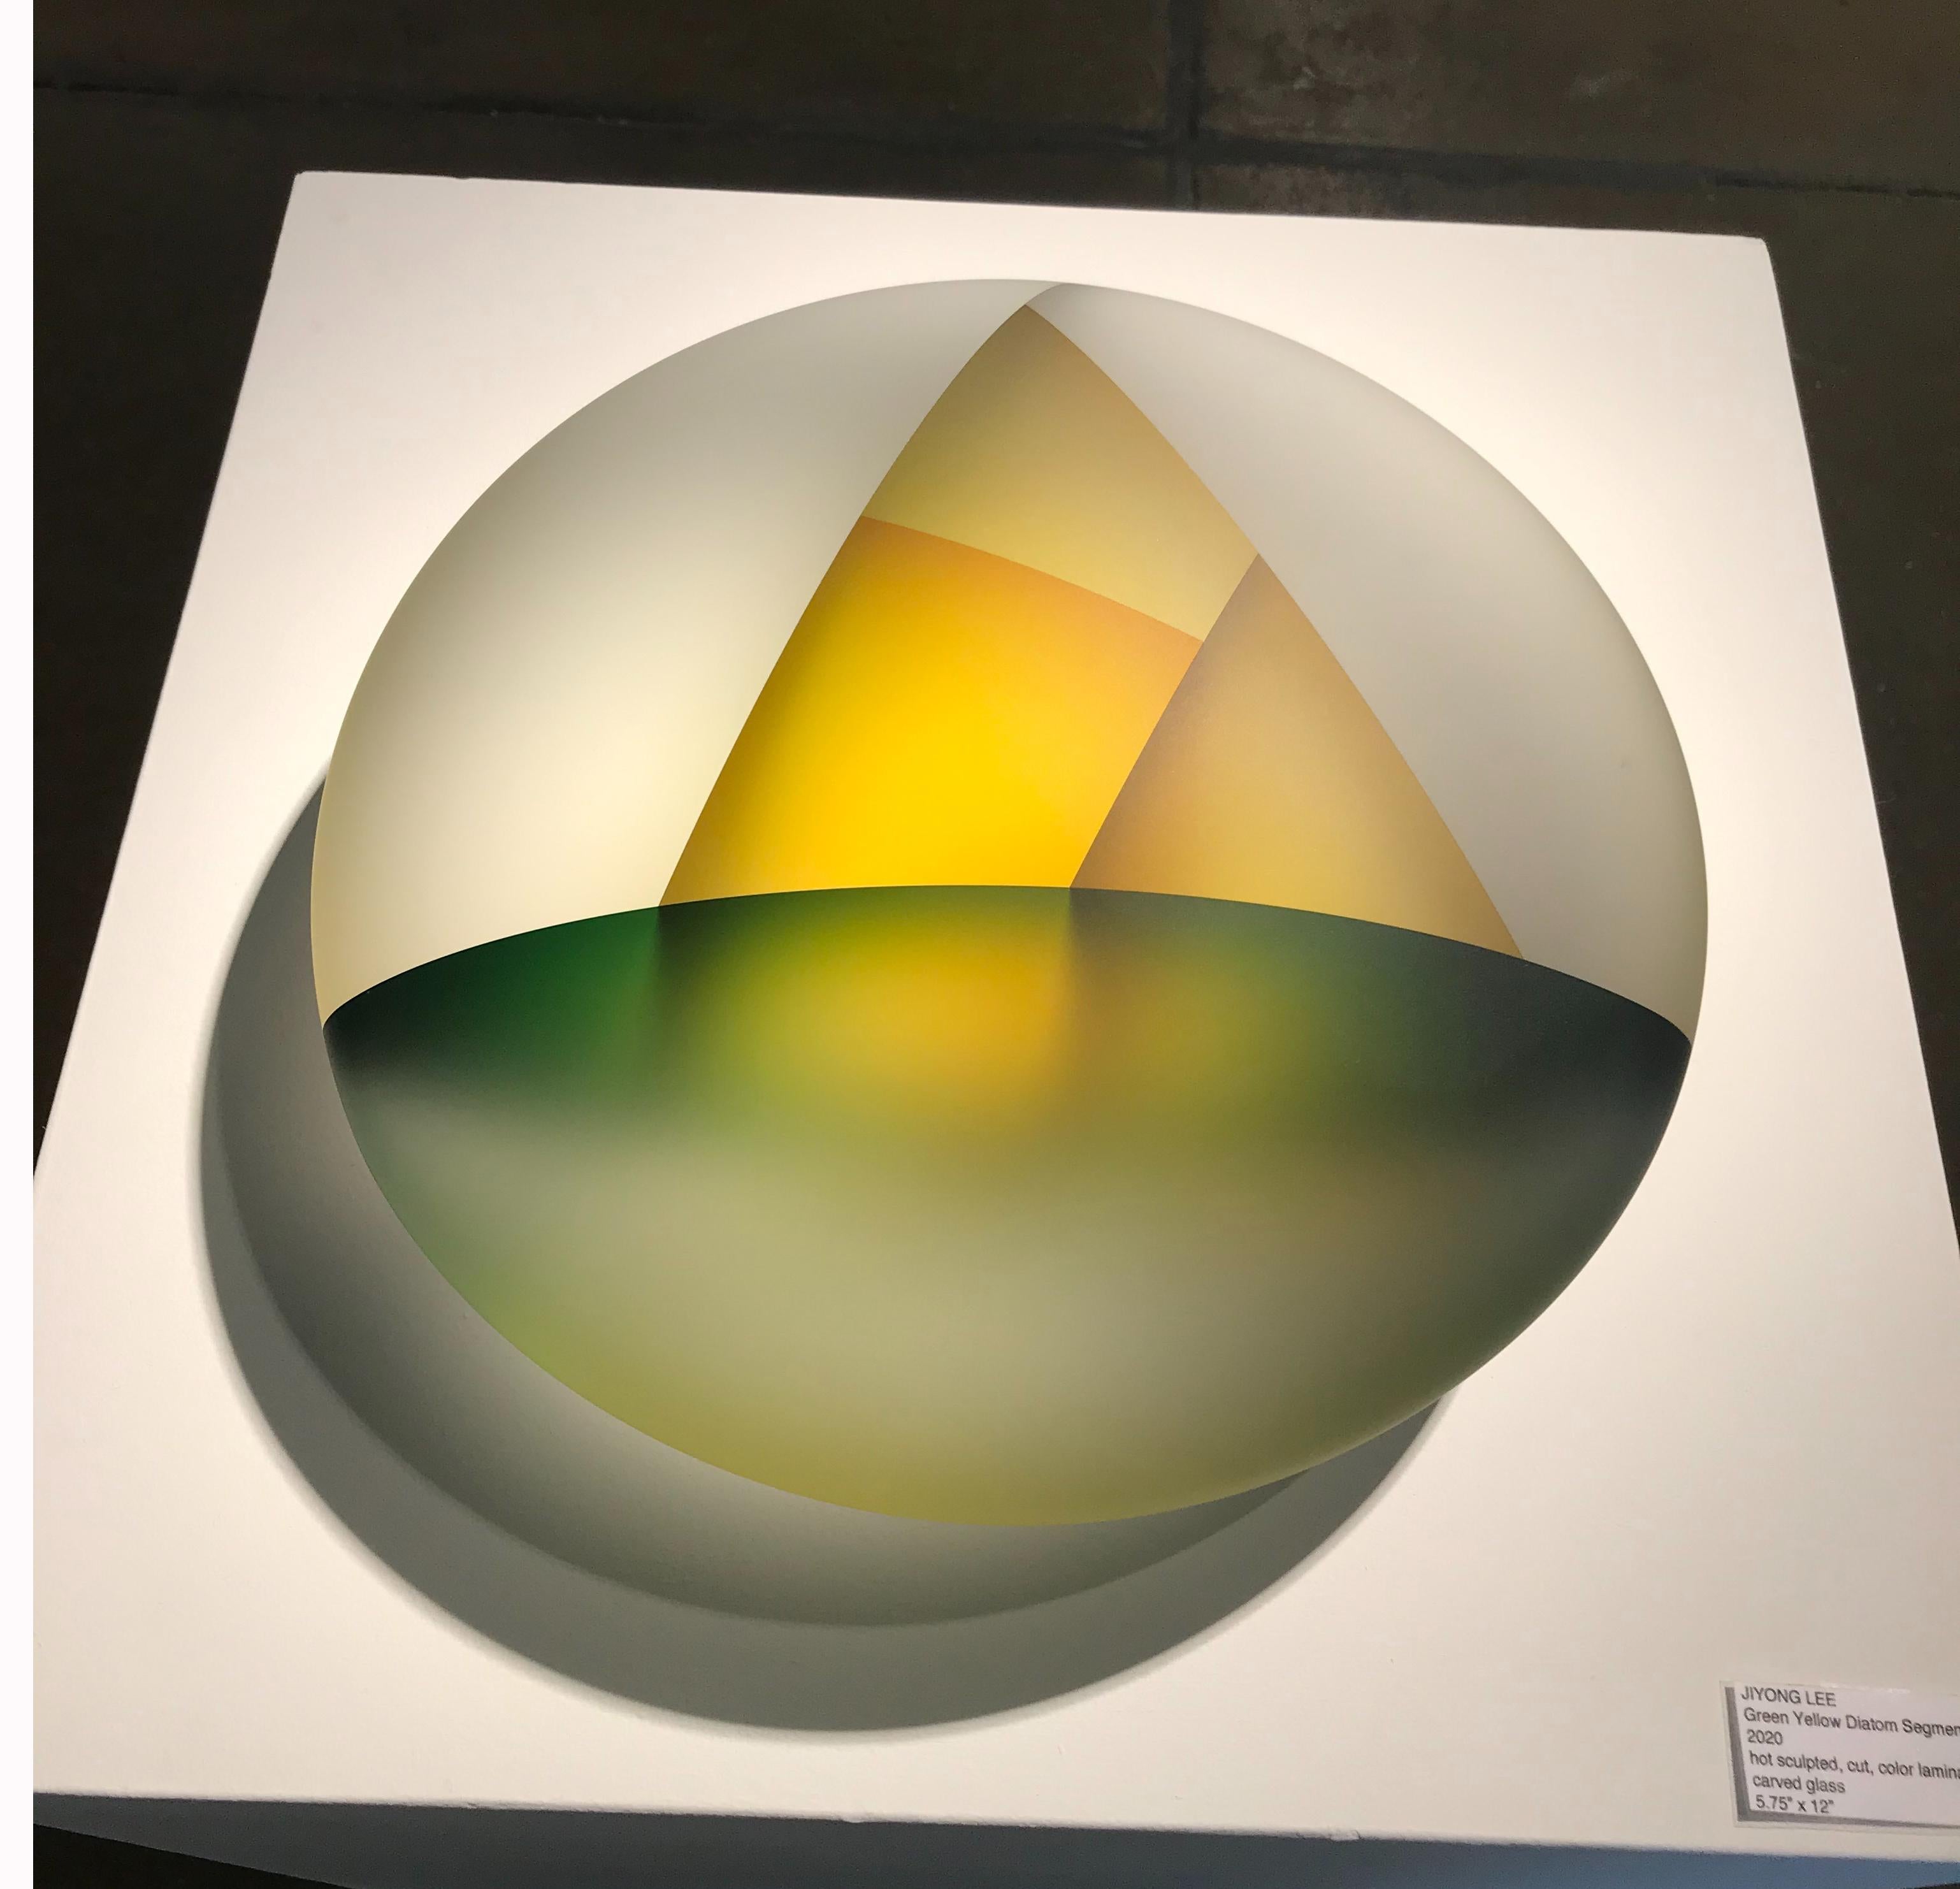 Lee was born and raised in South Korea. He is a studio artist and an associate professor of art and head of the Glass program at Southern Illinois University Carbondale. He has won a number of honors, including the Bavarian State Prize from